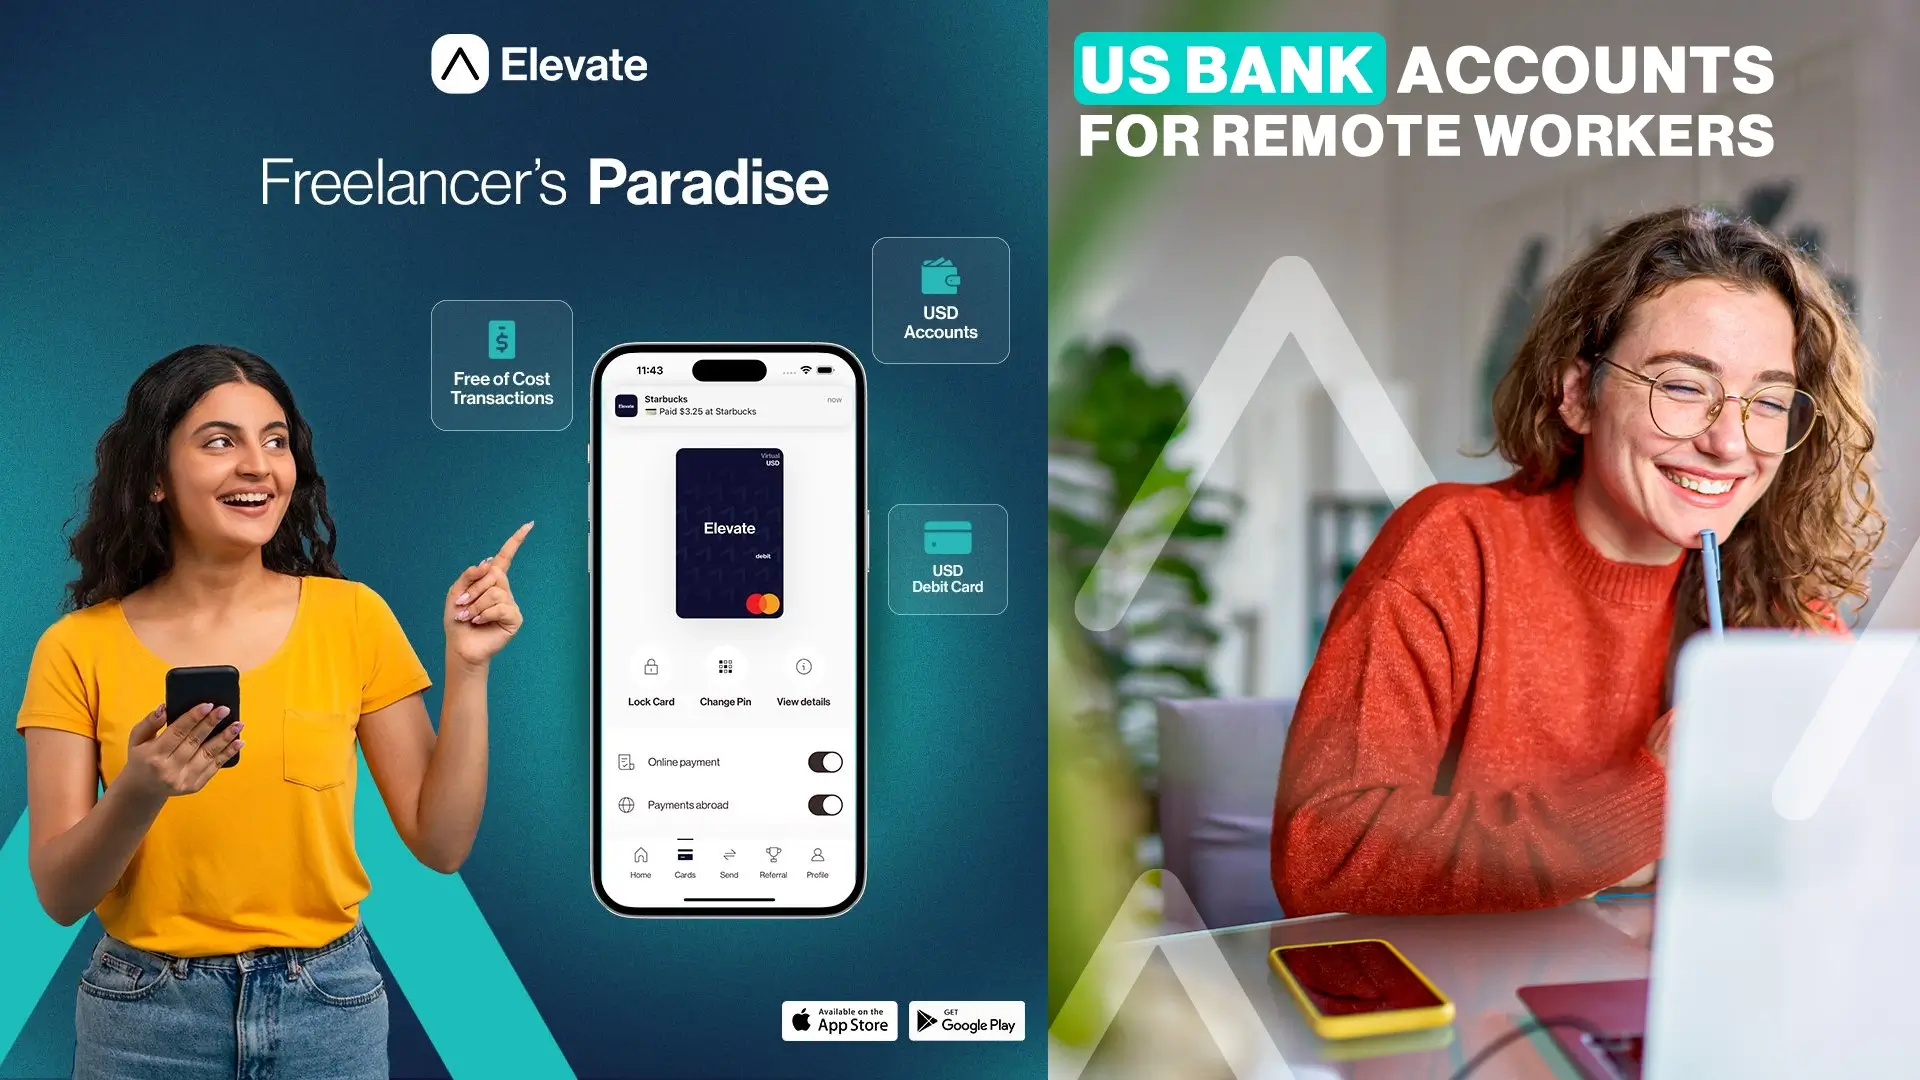 Elevate Pay: The Premier US Bank Account for Remote Workers (5 tips)